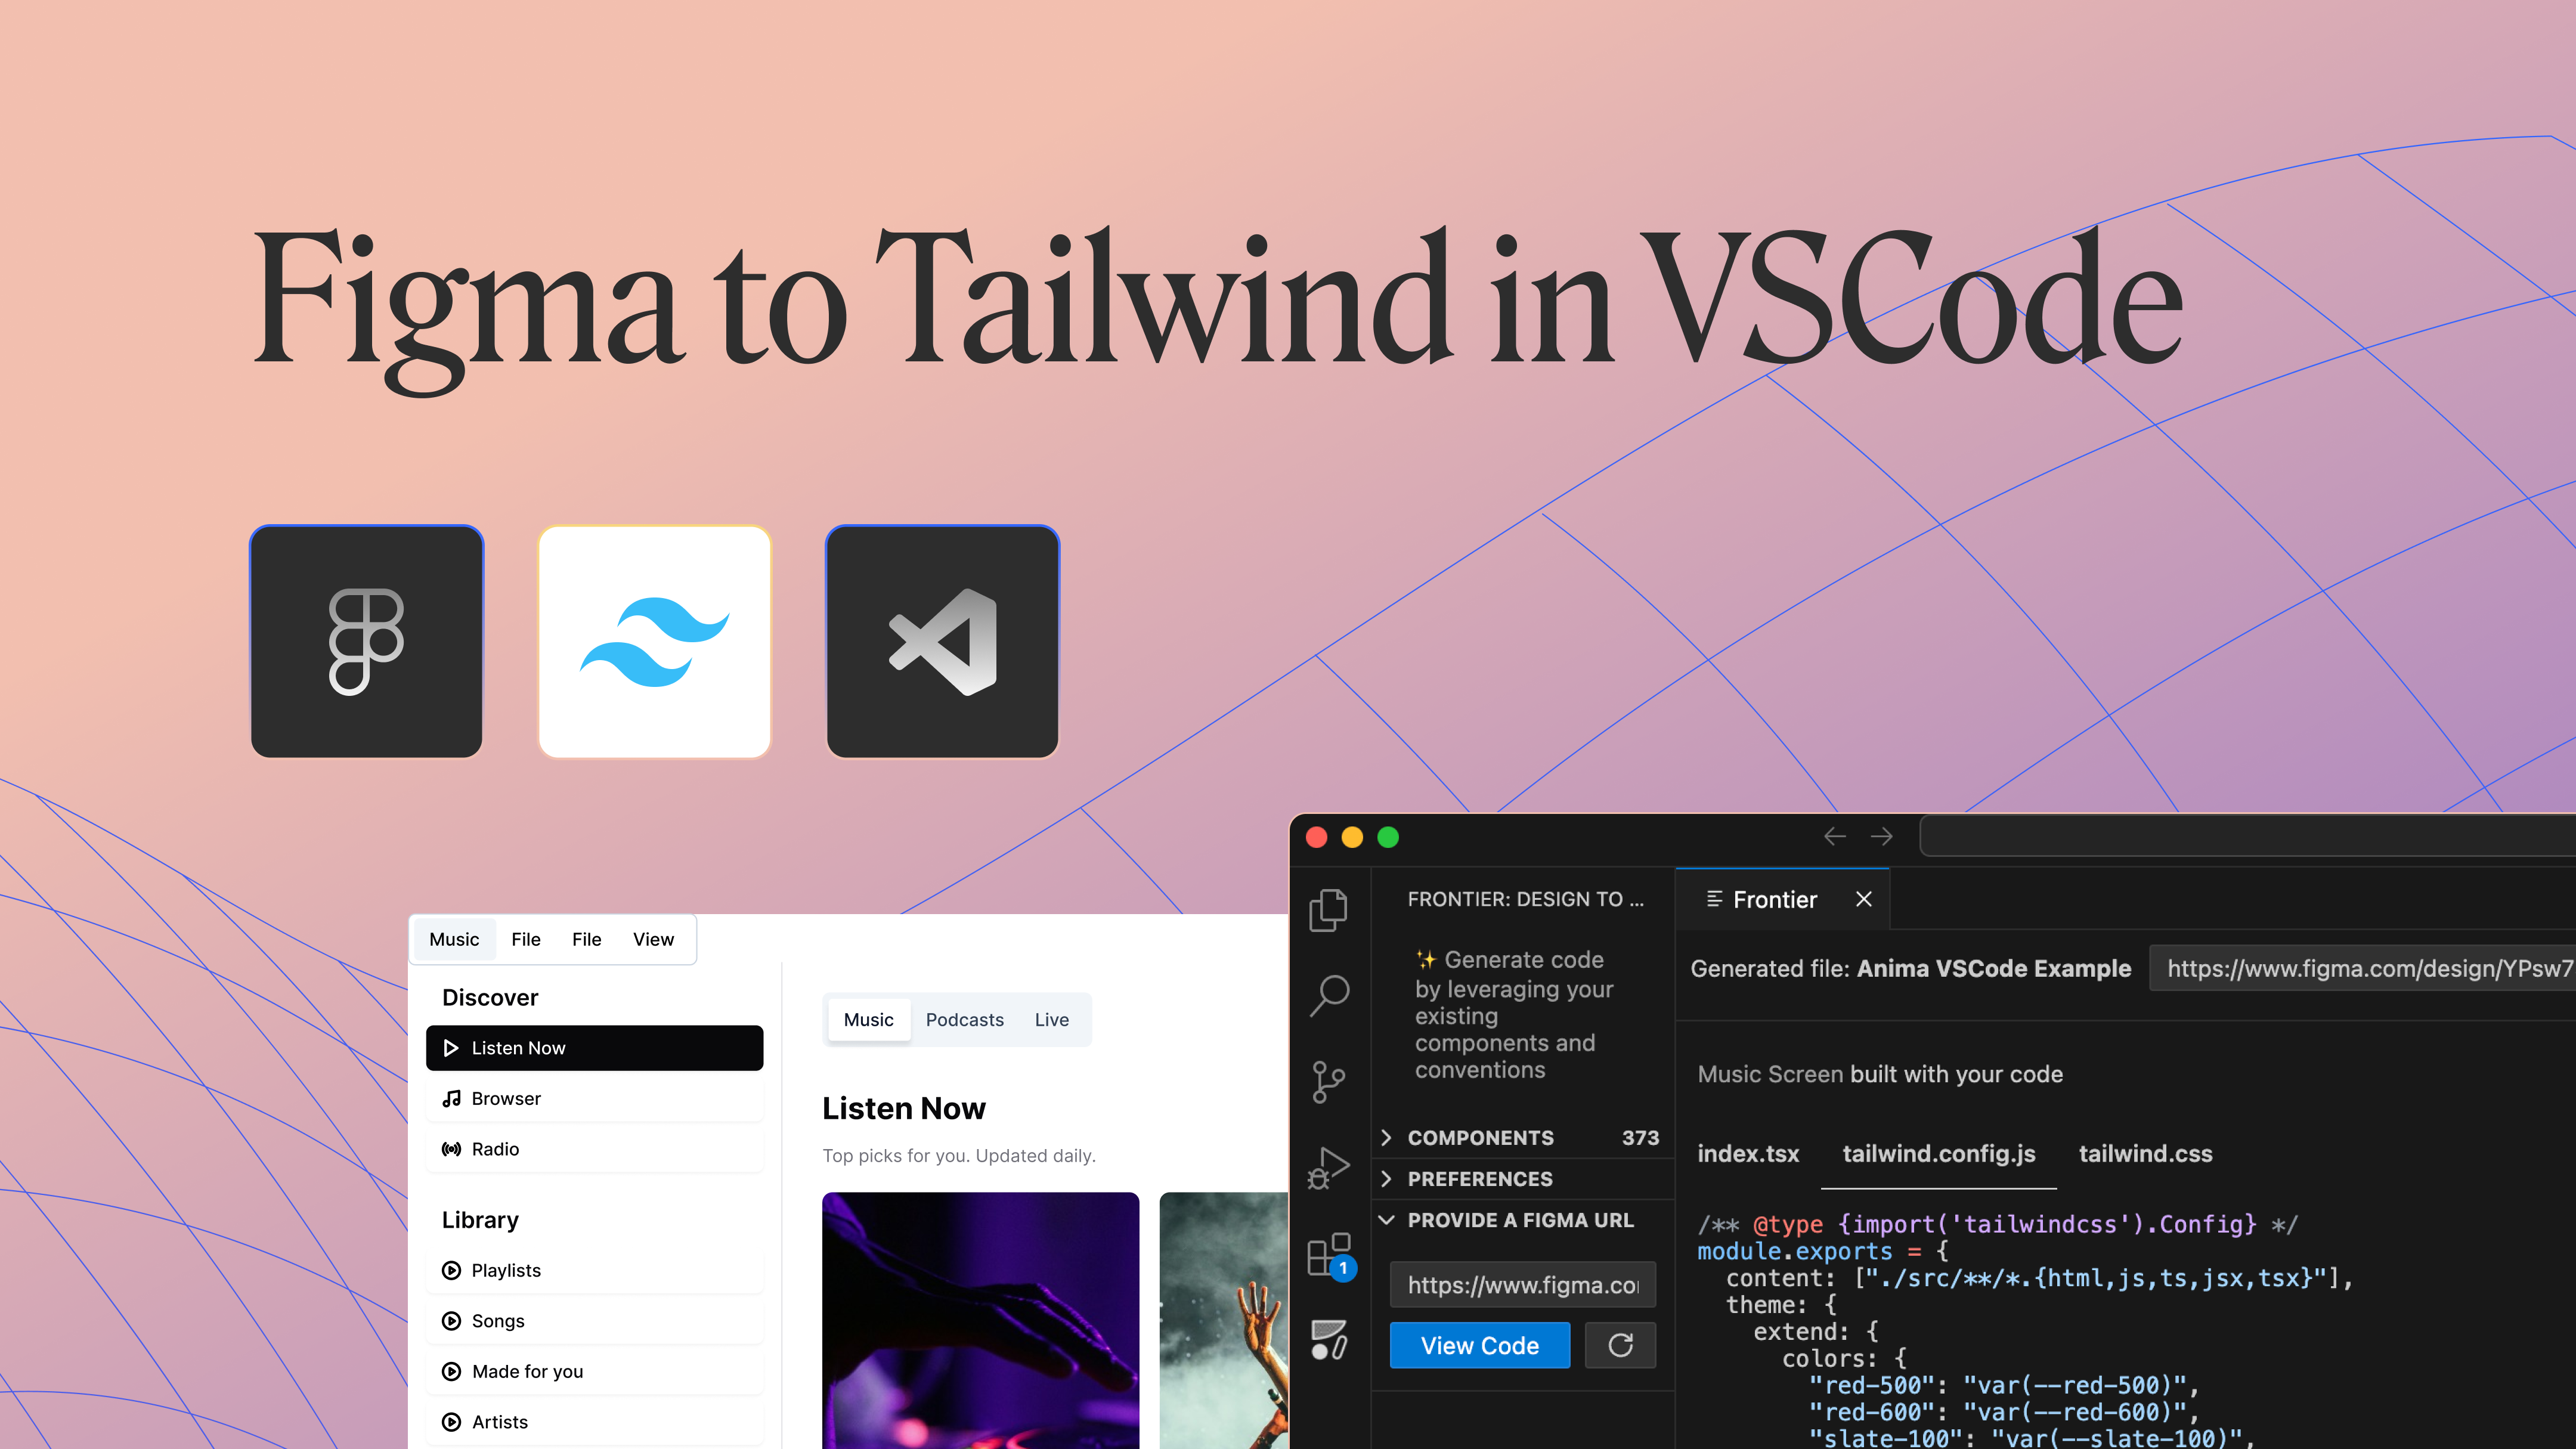 Figma to Tailwind in VSCode